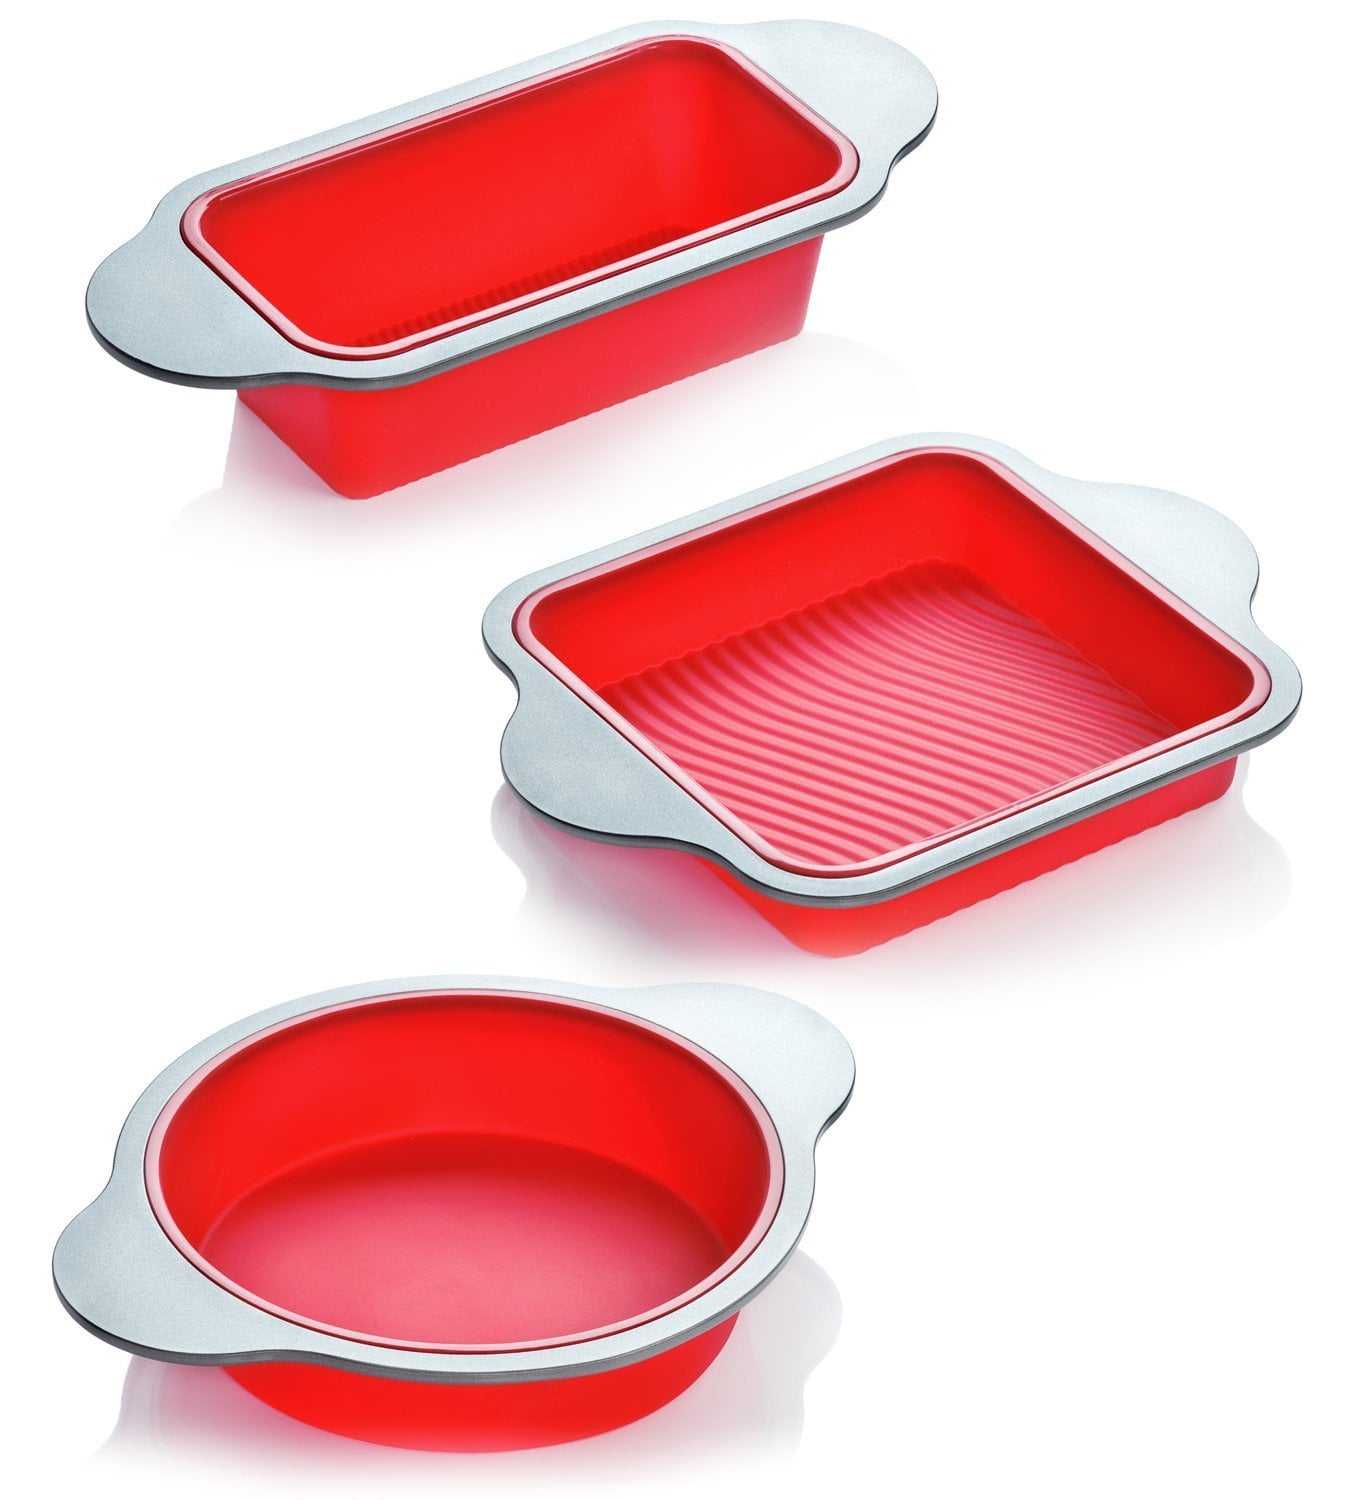 Details about   Vincenza Silicone Cake Pan Tray Mould Home Bakeware 18CM Round Non Stick Bake 